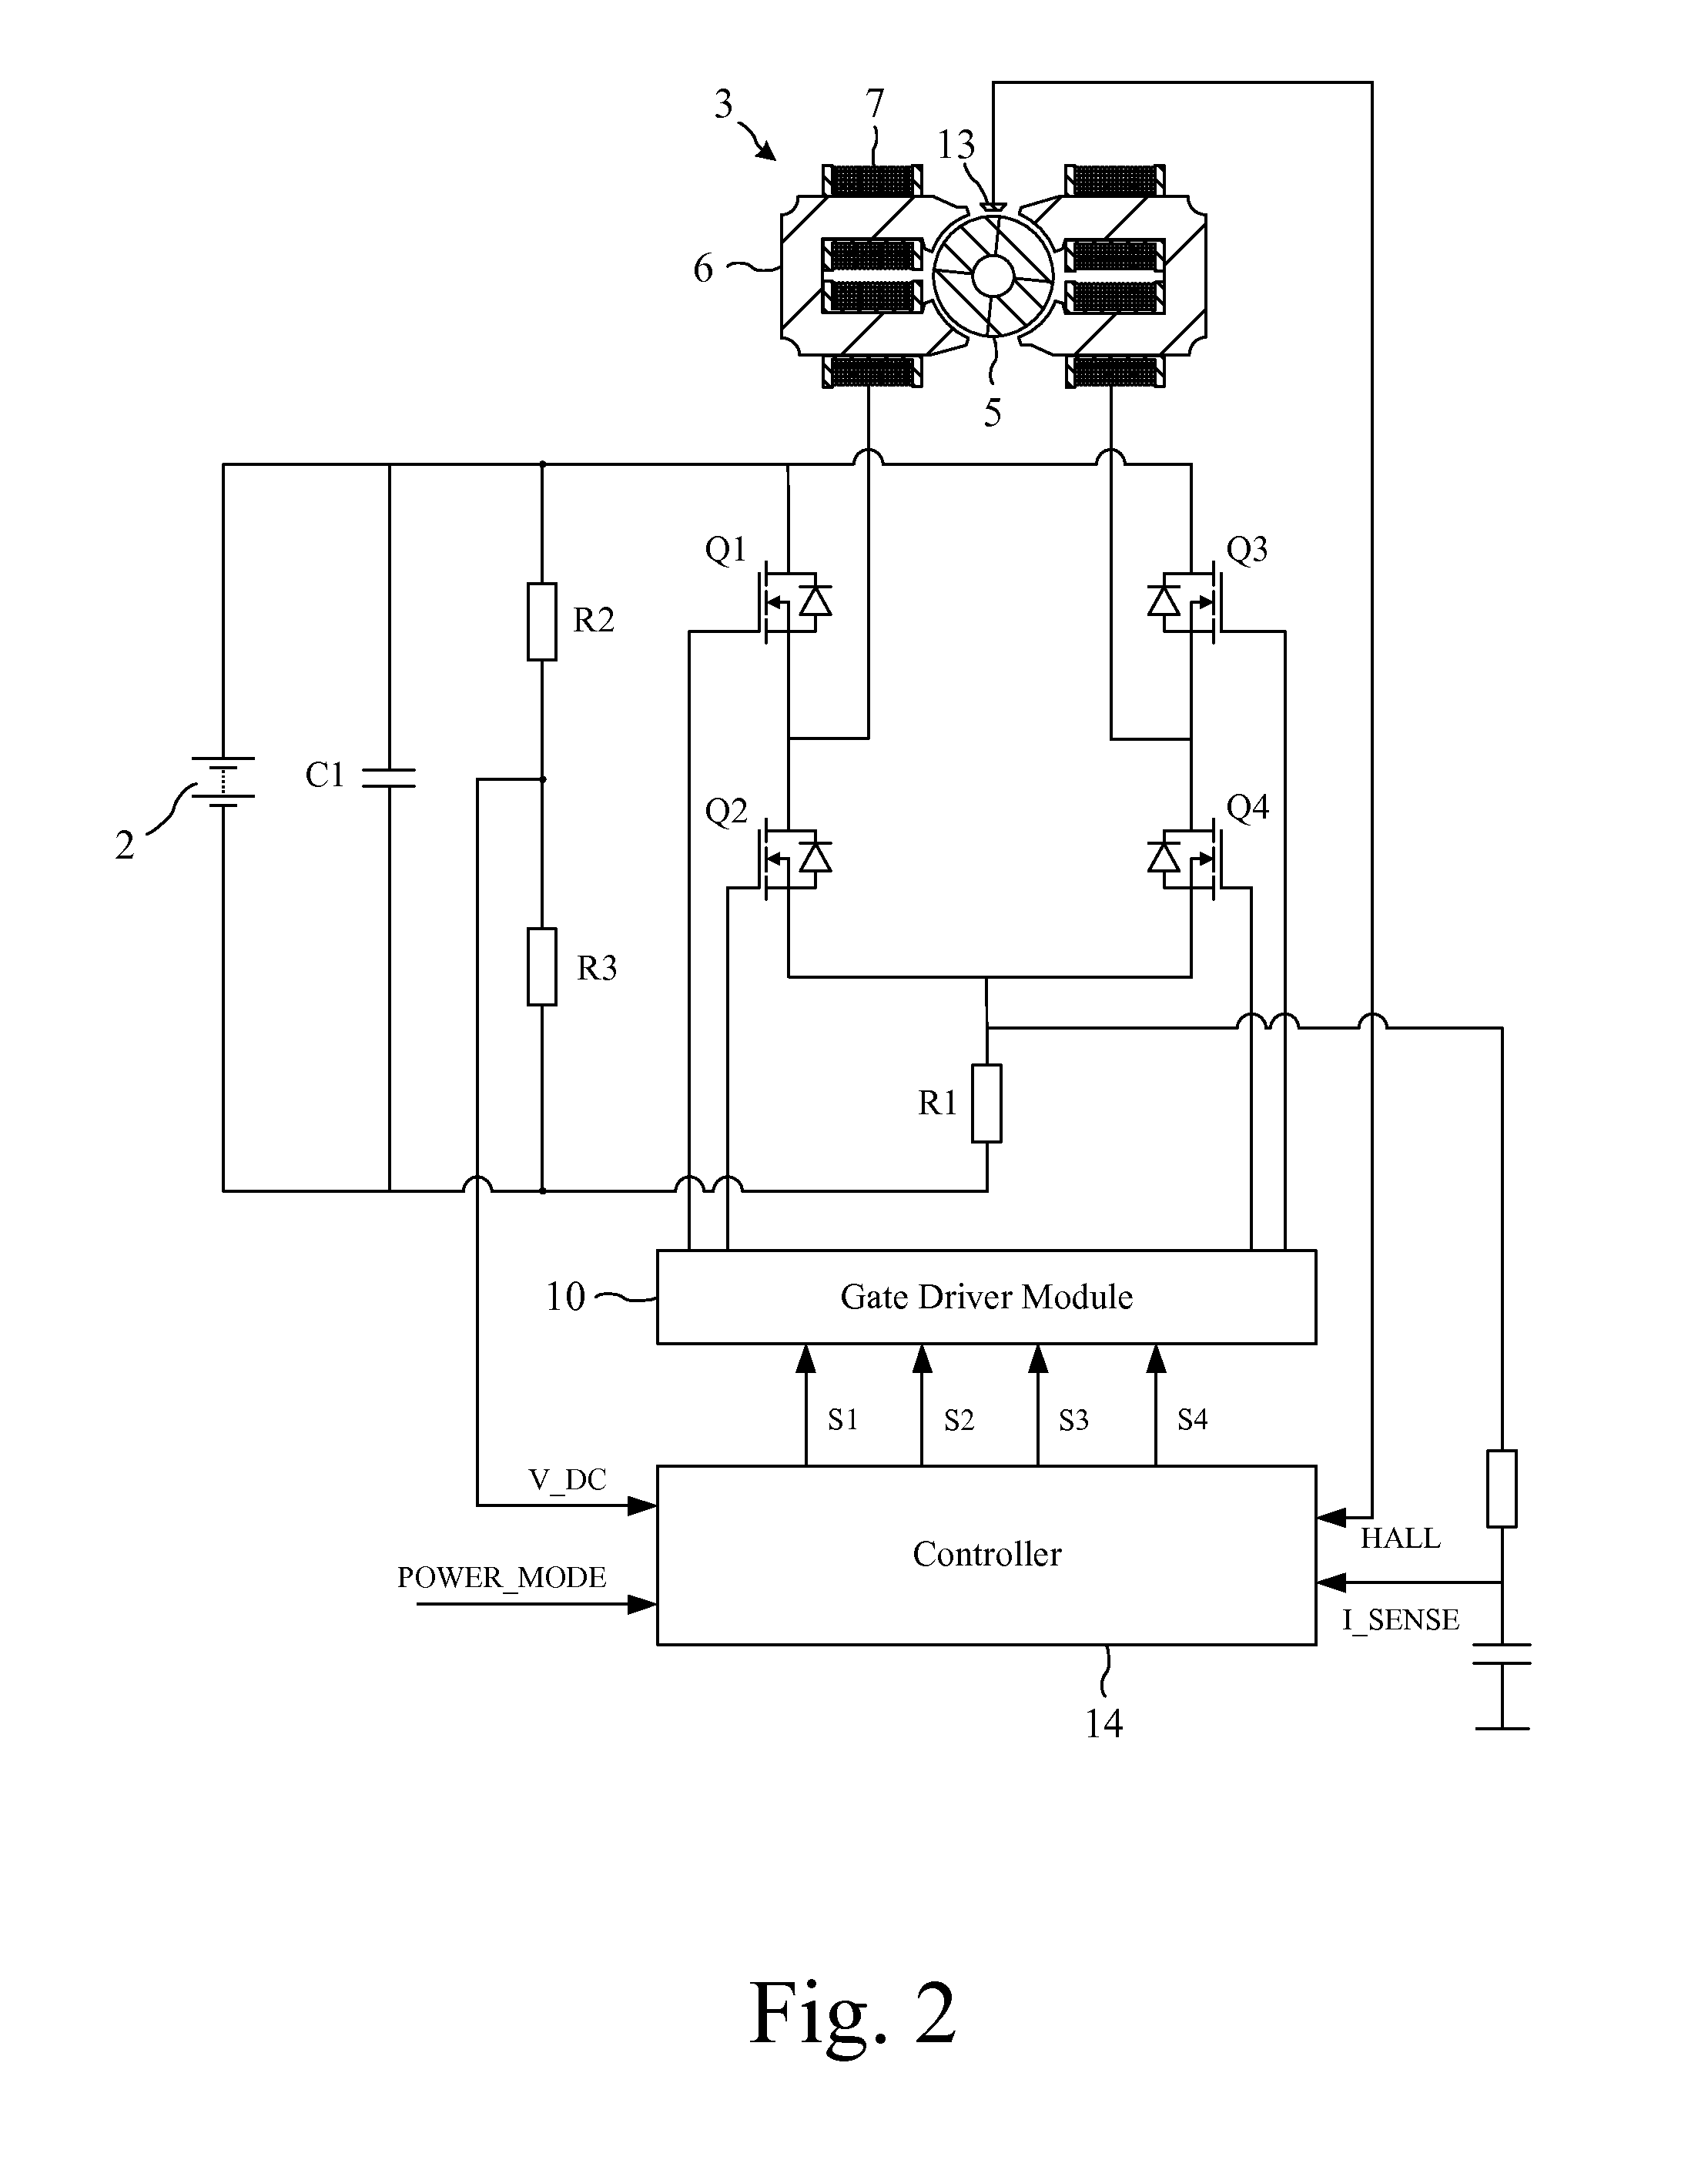 Method of controlling a brushless permanent-magnet motor